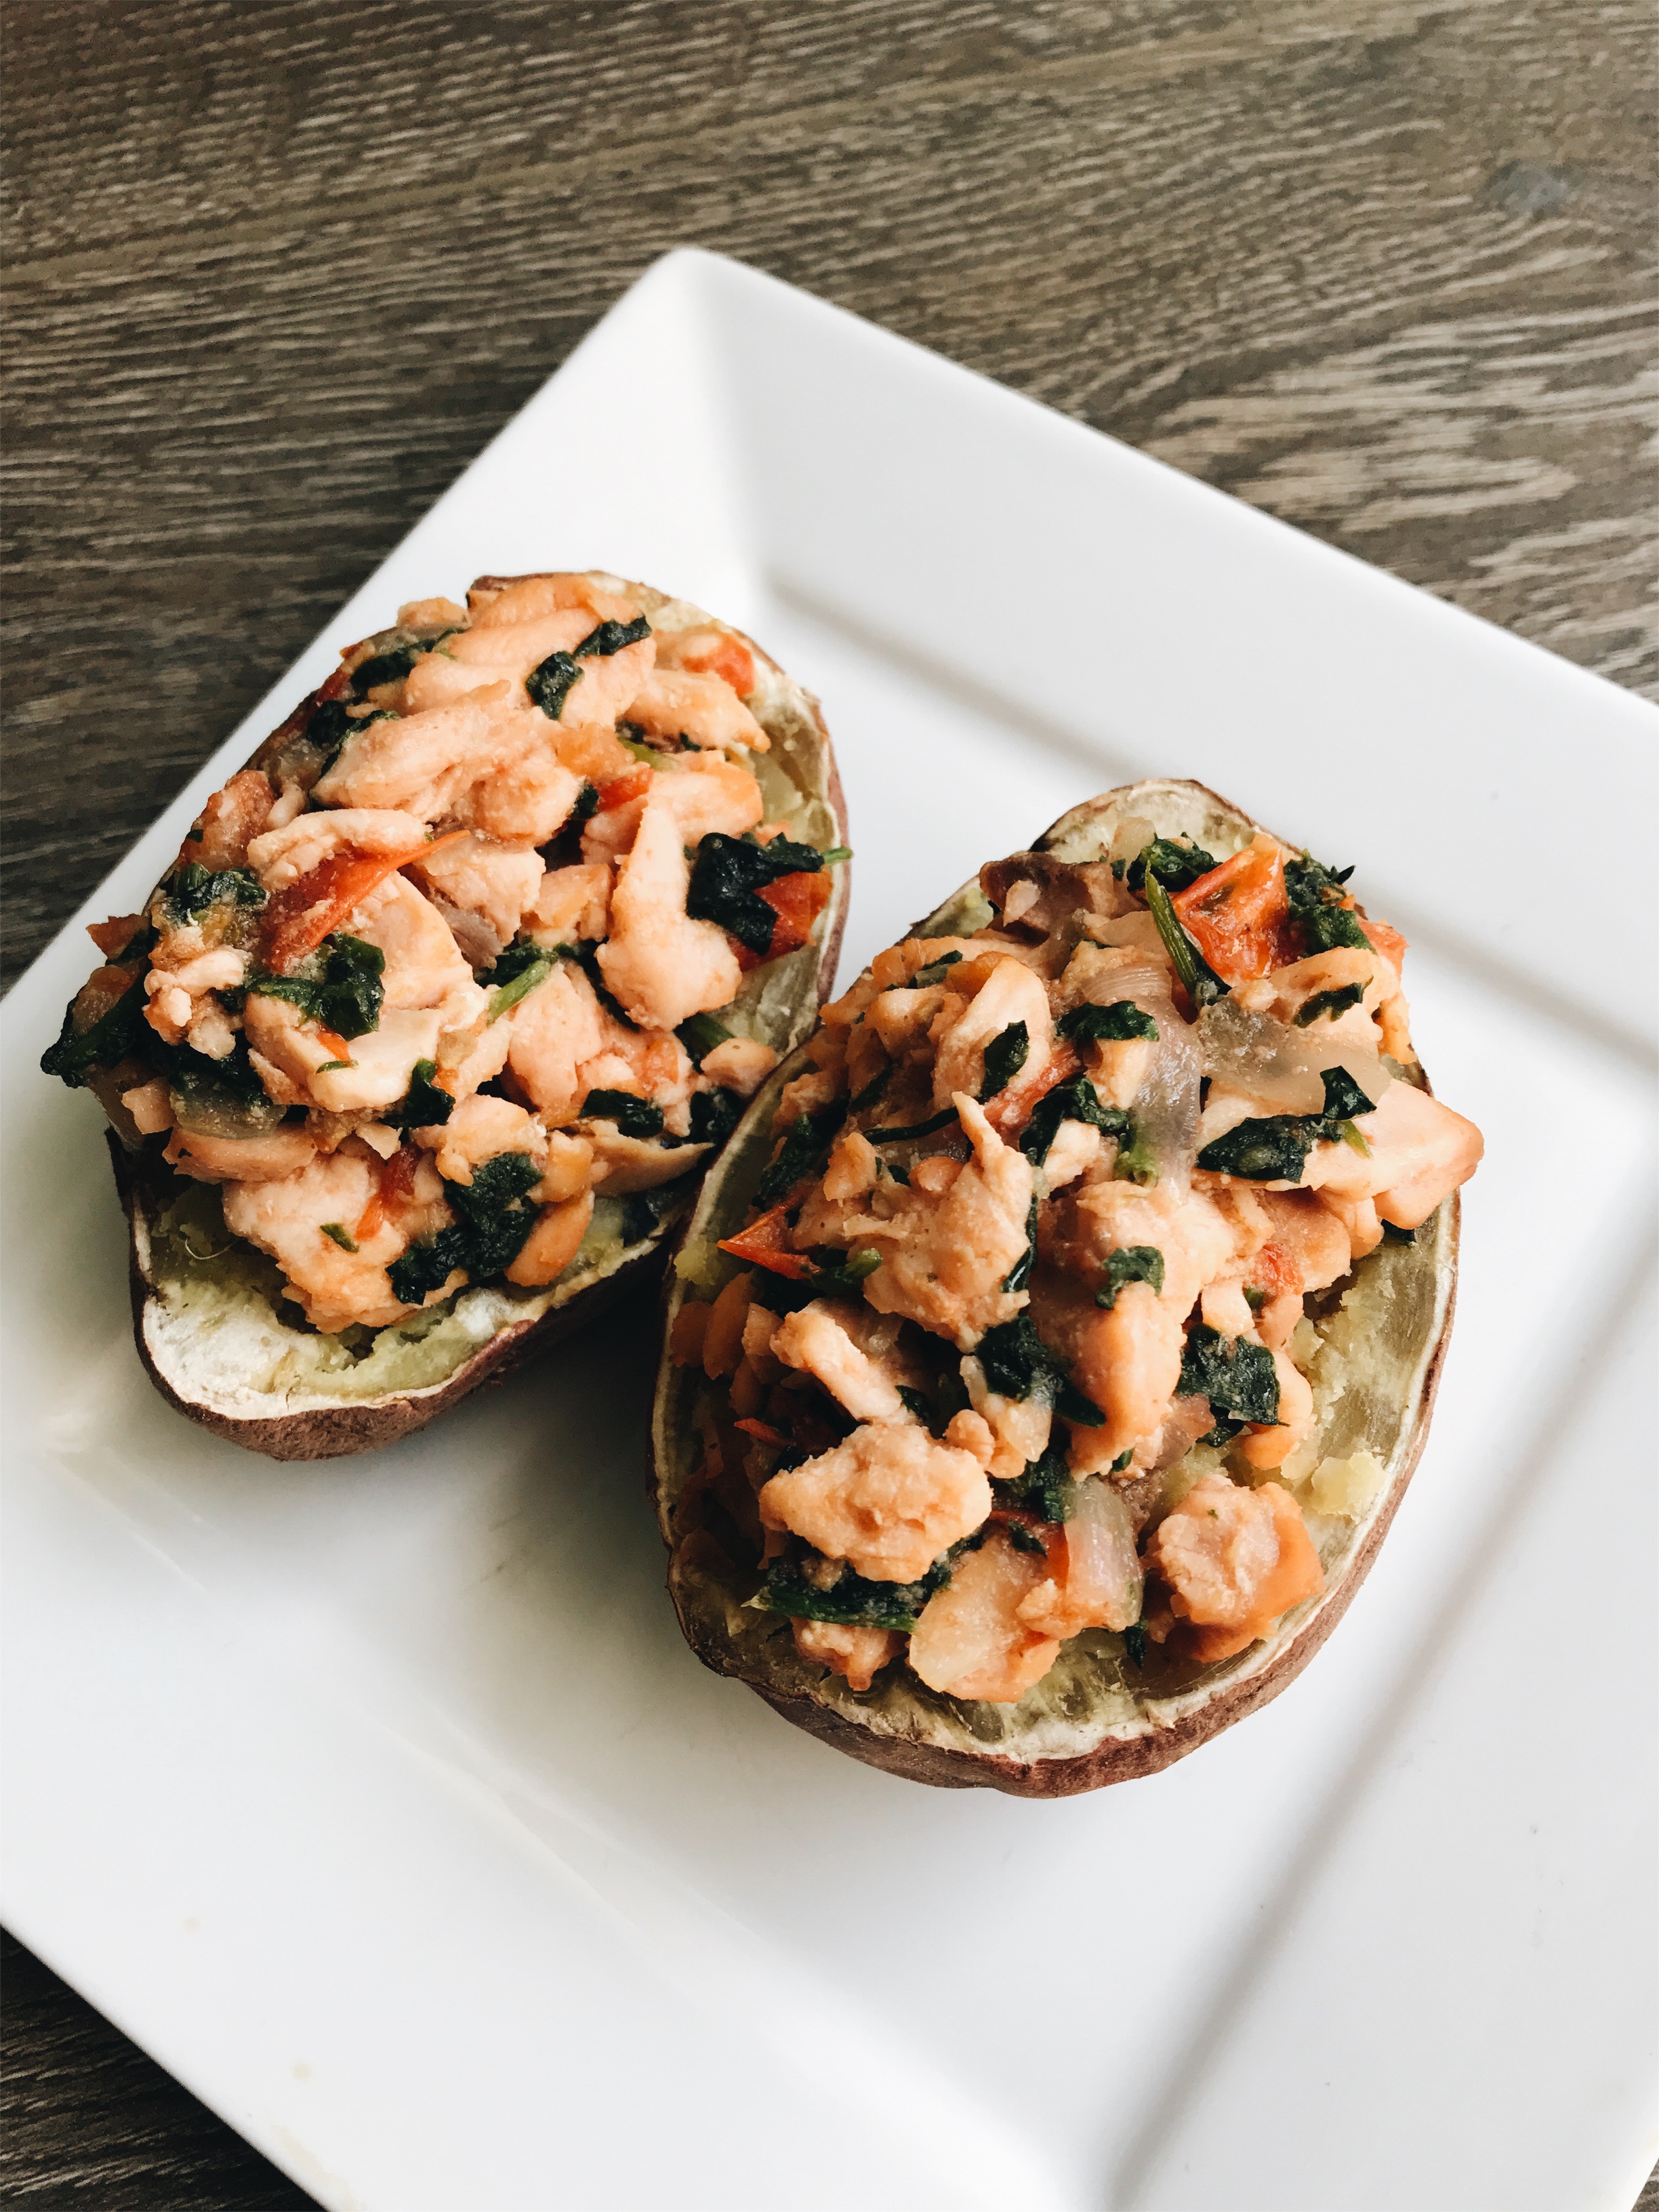 Travel Noire Eats And Recipes: Nigerian Baked Sweet Potato With Salmon